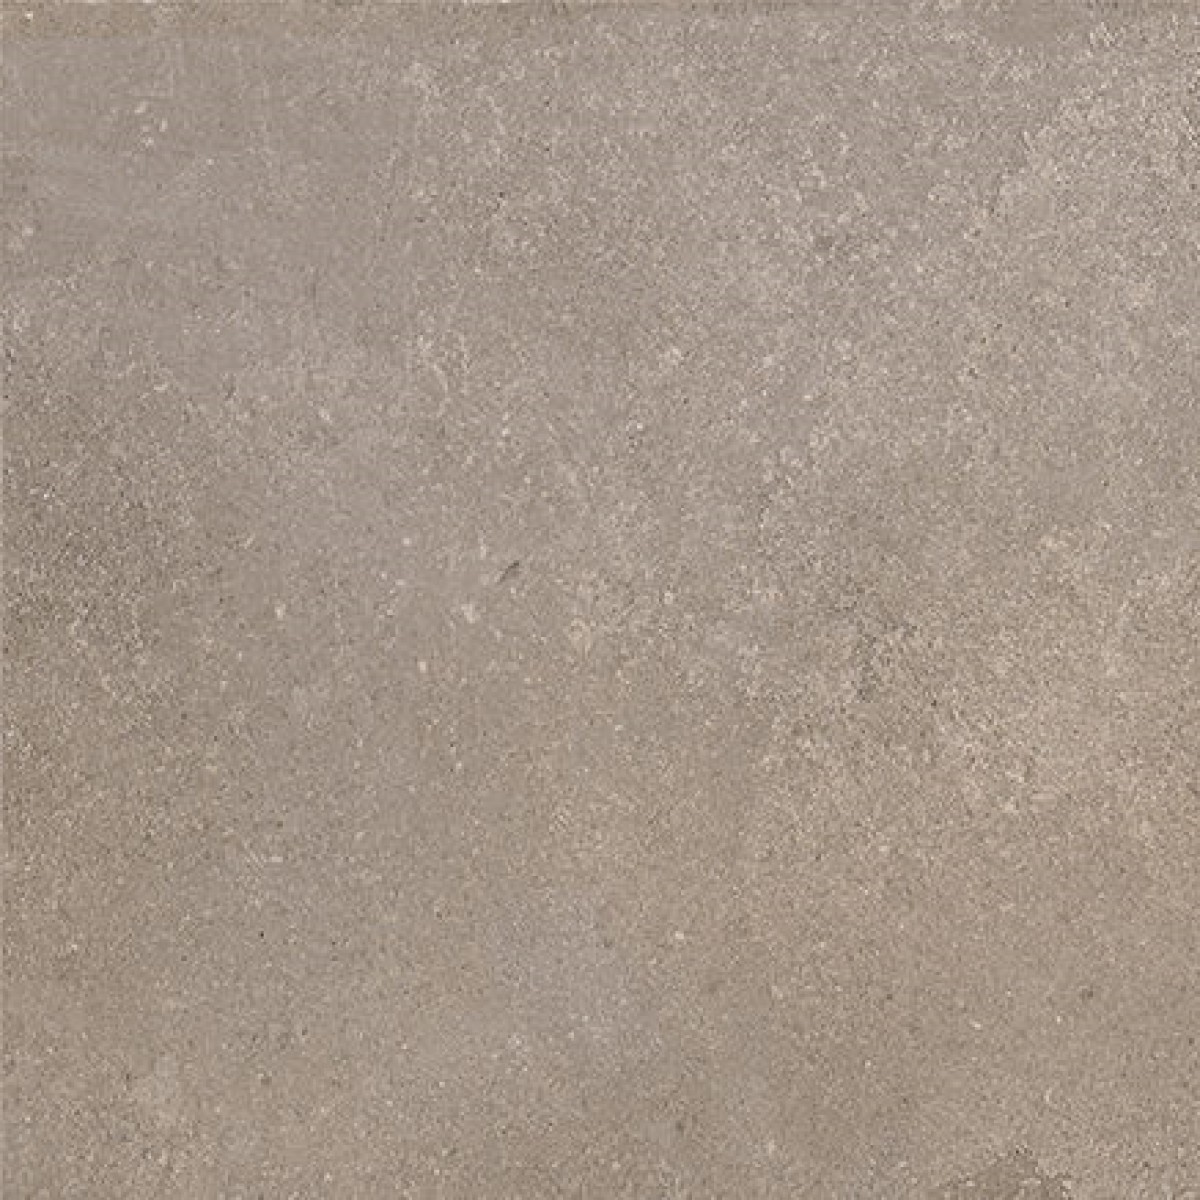 120x280 taupe stone